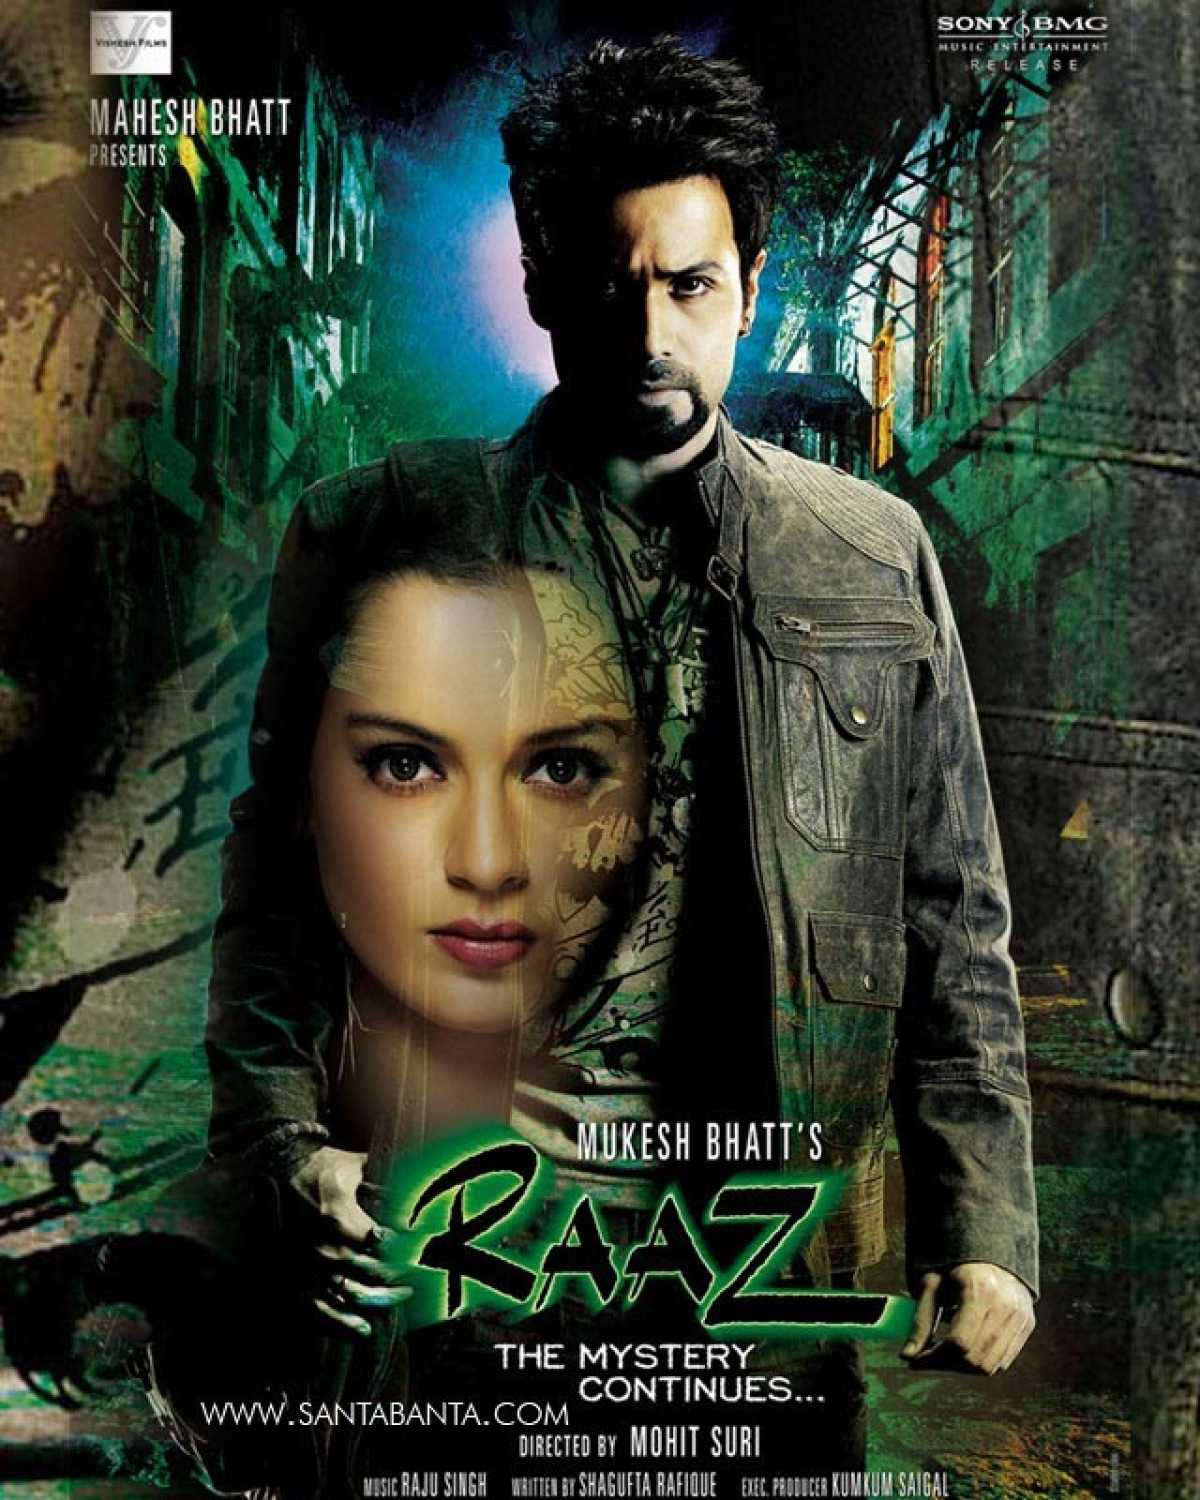 raaz-the-mystery-continues-2009-360-poster.jpg